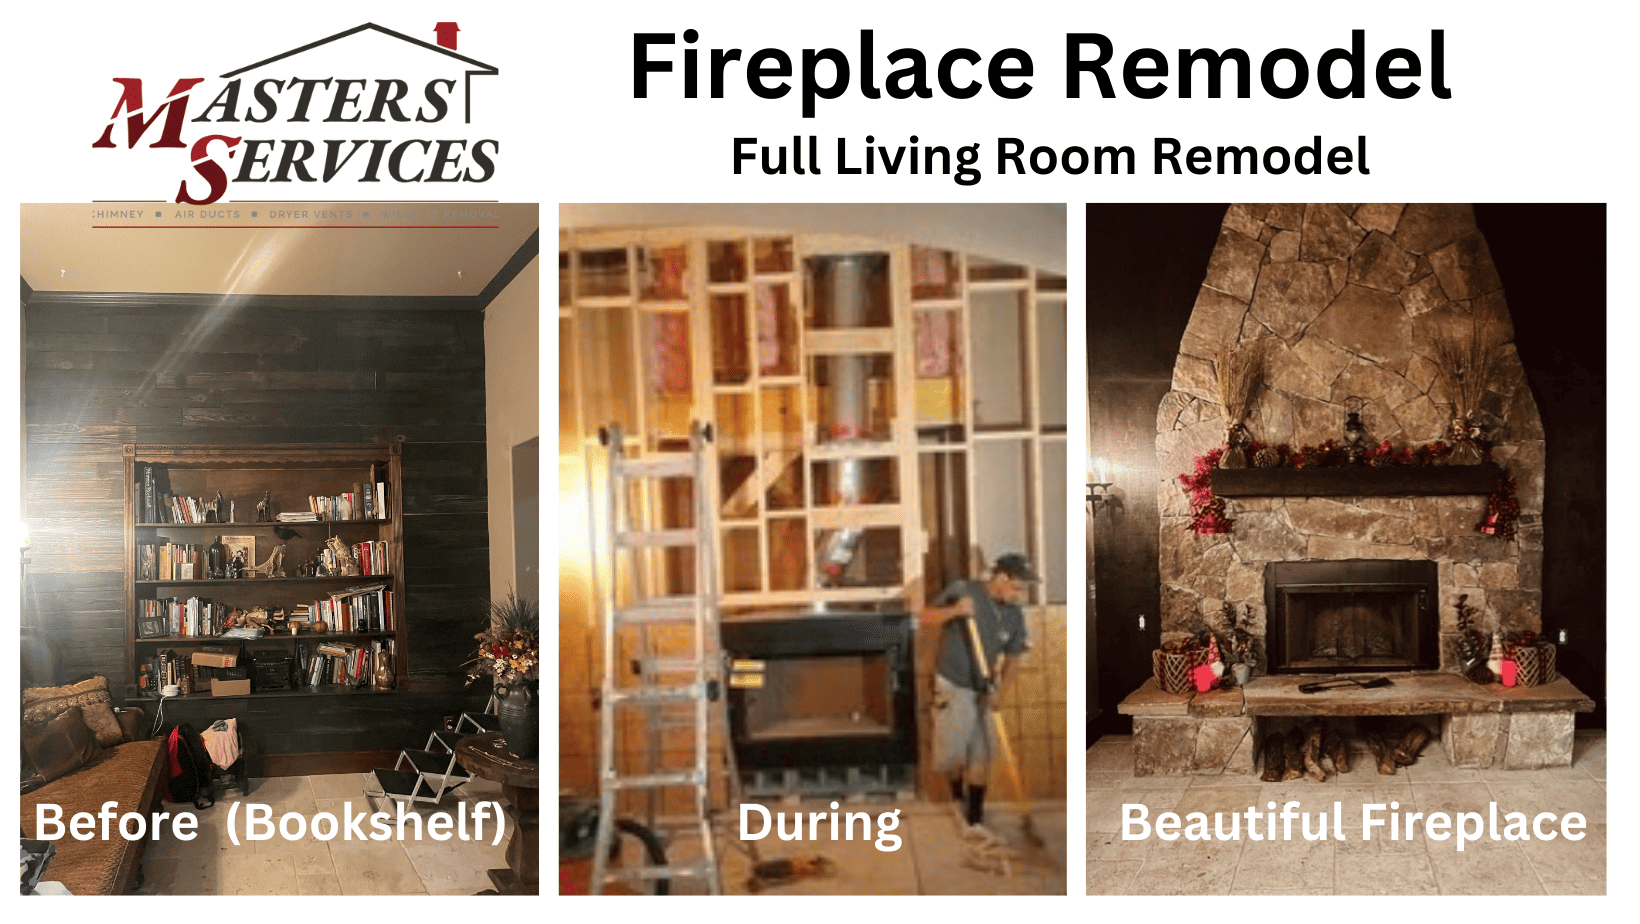 Dallas Fireplace Remodel and Houston Fireplace Remodel